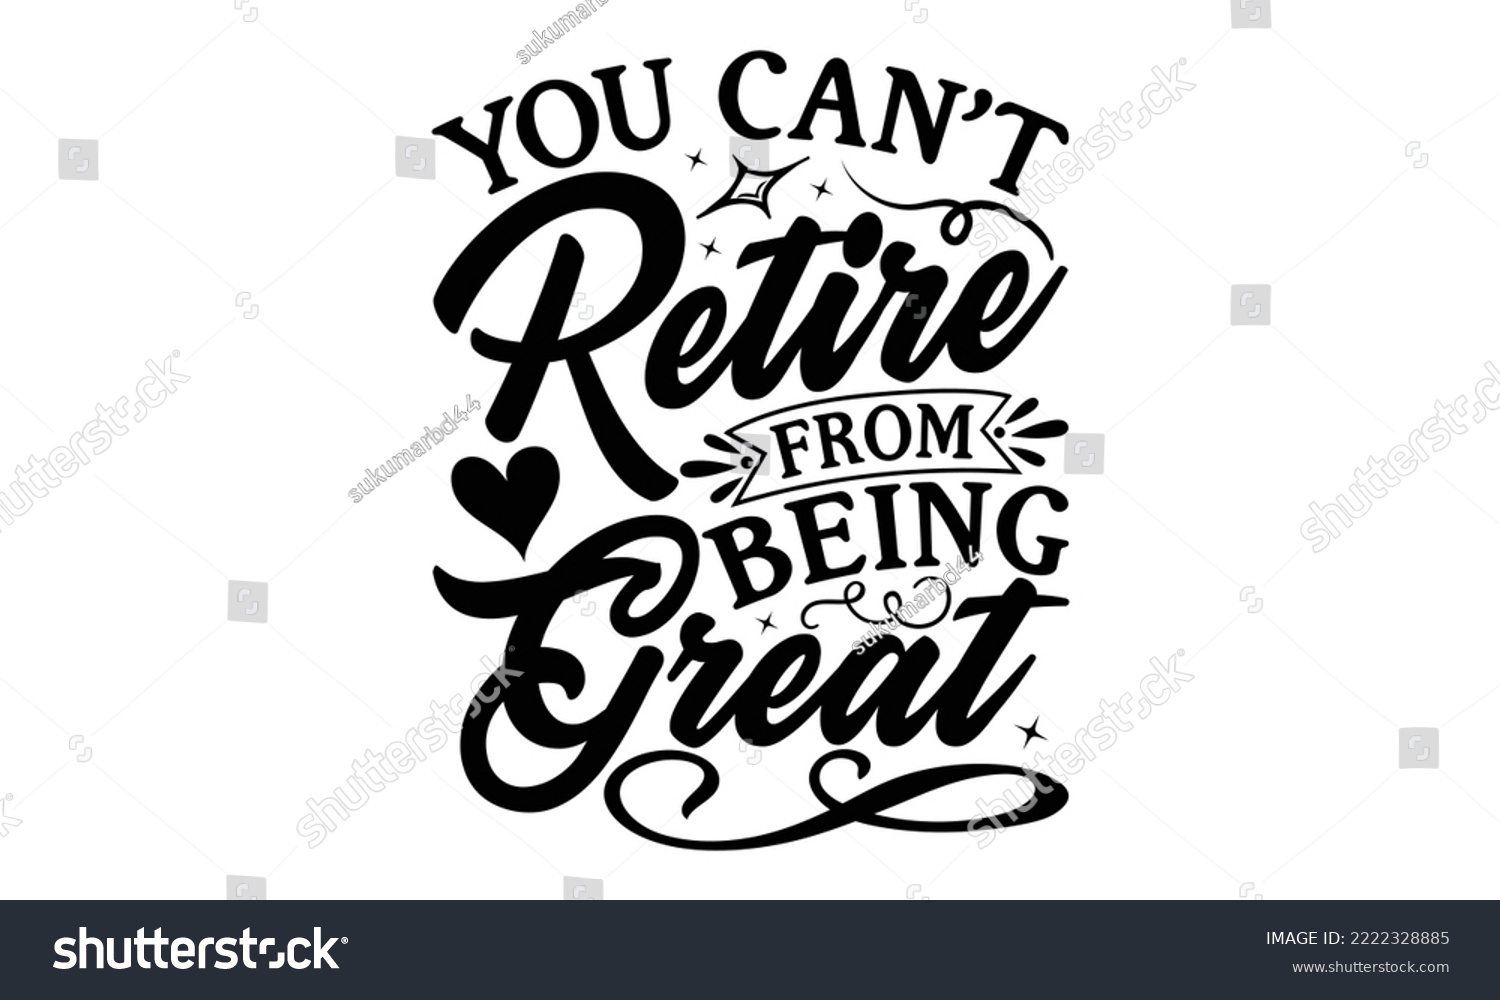 SVG of You Can’t Retire From Being Great - Retirement SVG Design, Hand drawn lettering phrase isolated on white background, typography t shirt design, eps, Files for Cutting svg